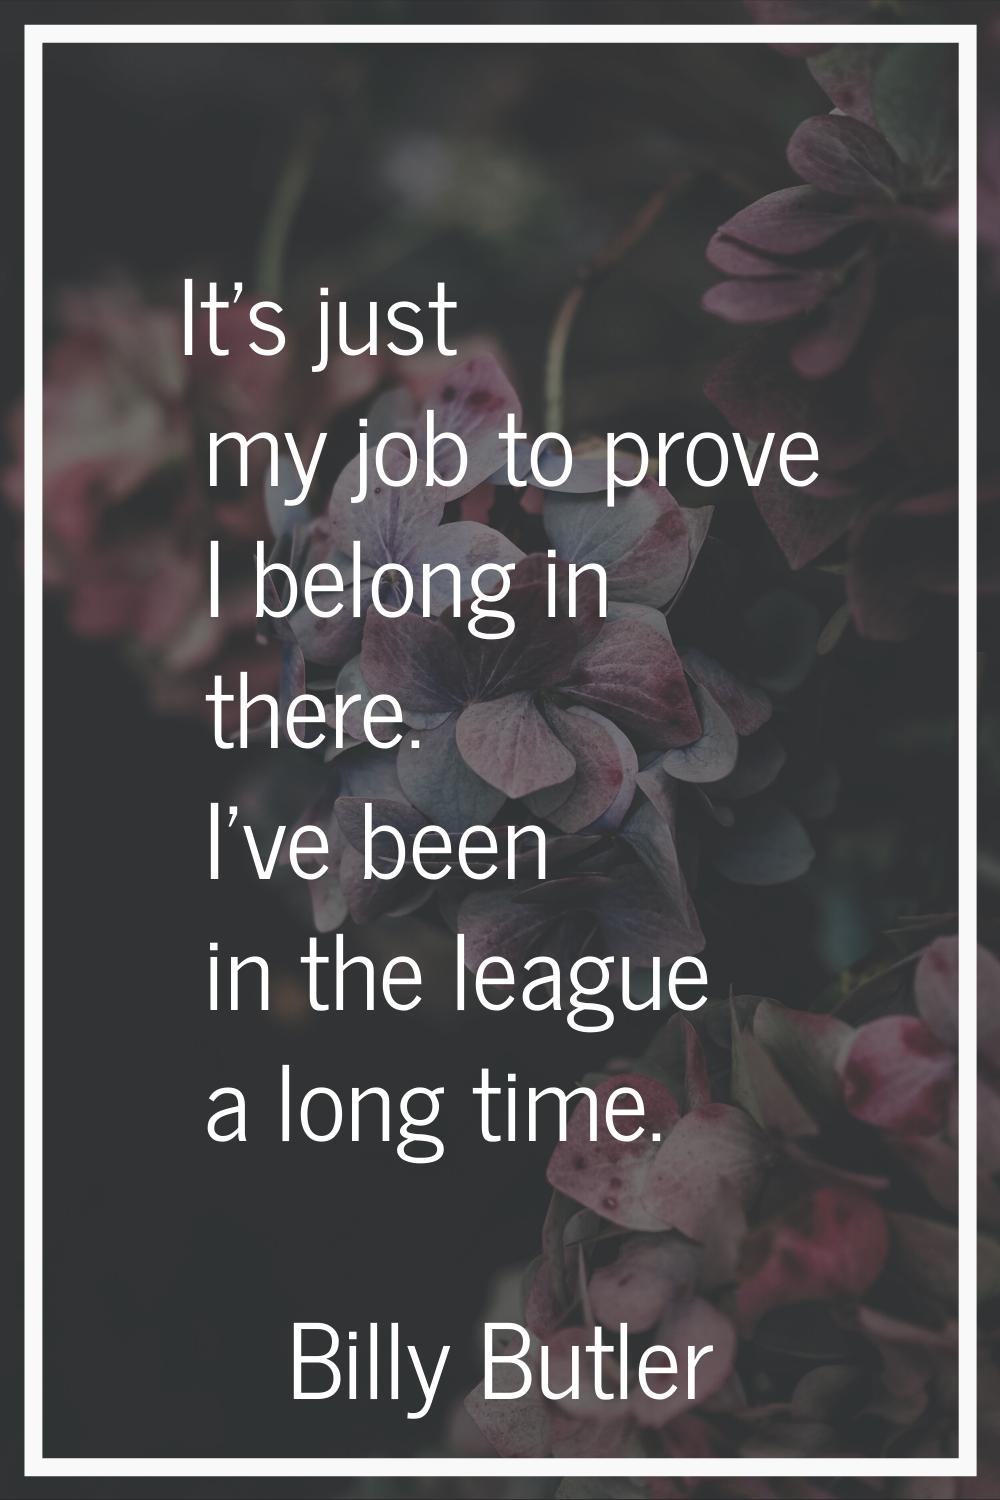 It's just my job to prove I belong in there. I've been in the league a long time.